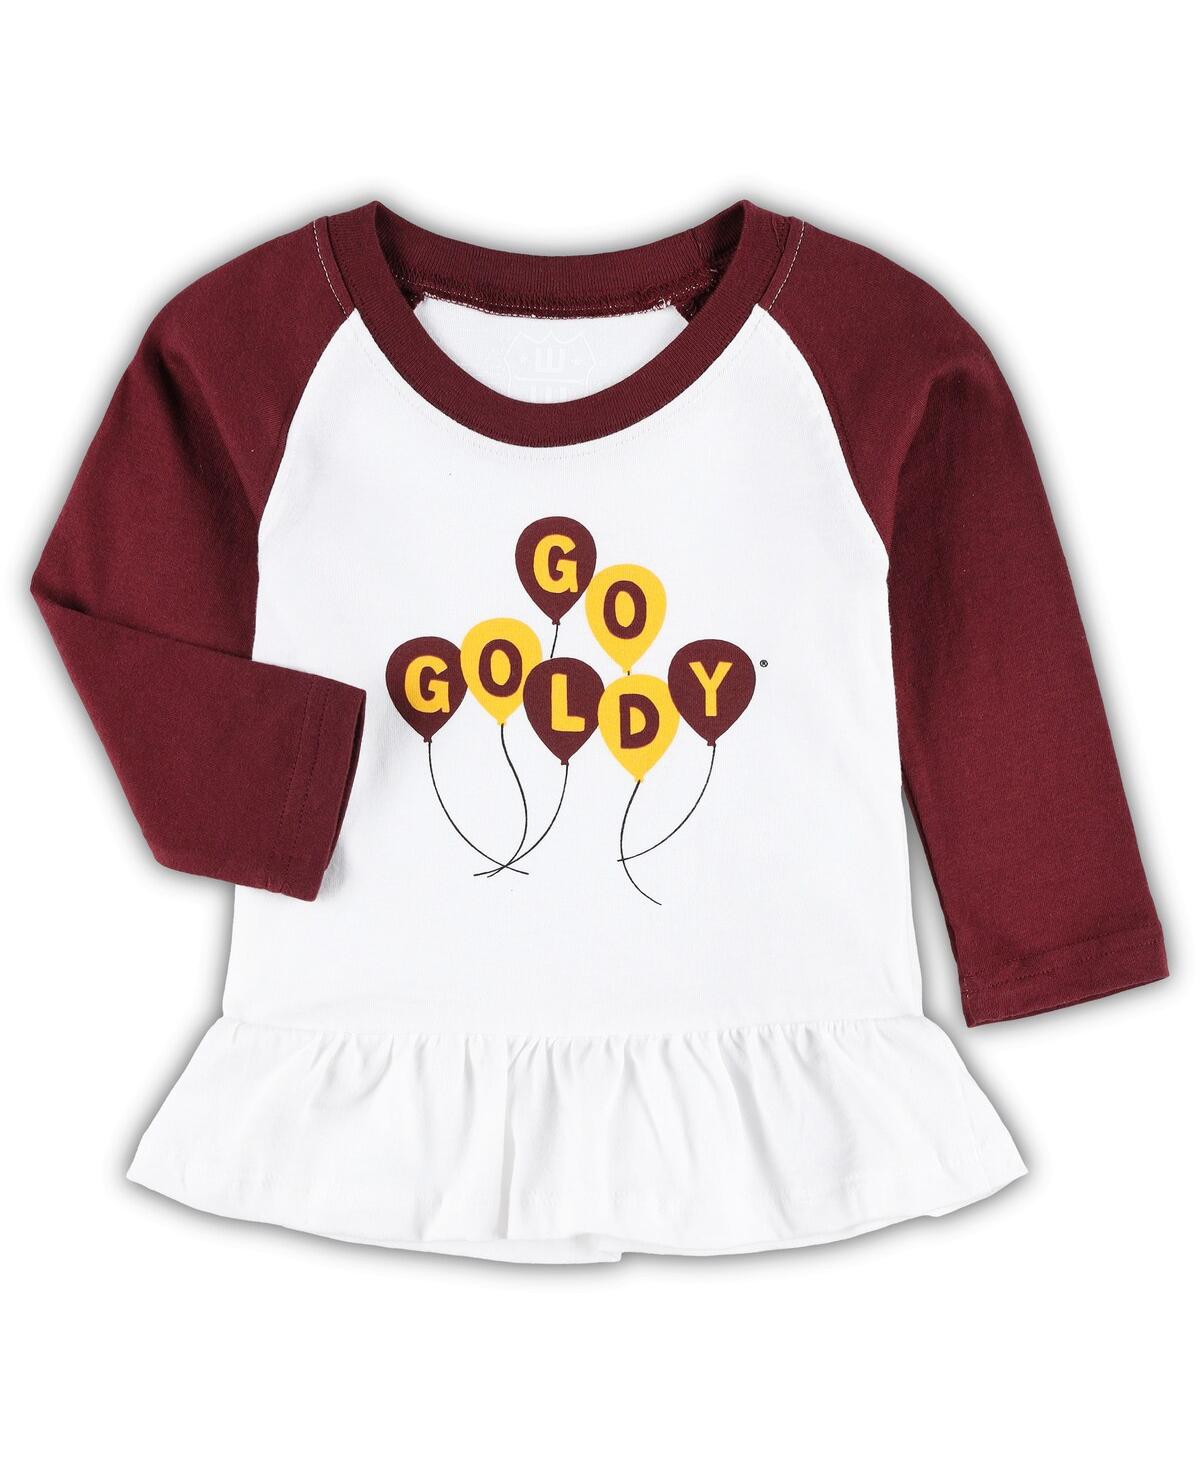 Shop Wes & Willy Girls Infant  Maroon, White Minnesota Golden Gophers Balloon Raglan 3/4-sleeve T-shirt An In Maroon,white